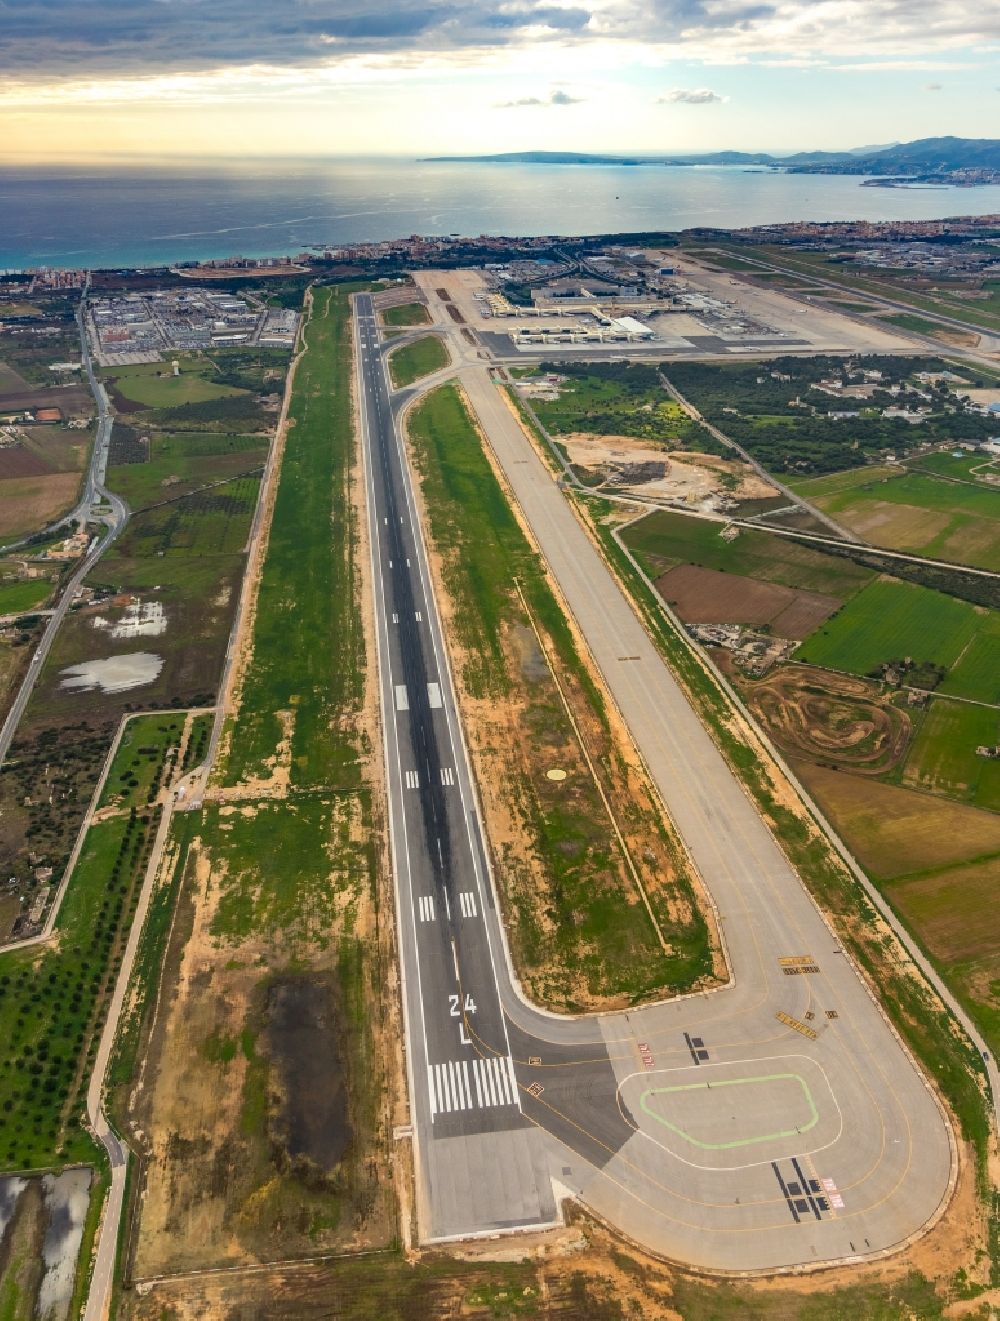 Aerial photograph Palma - Runway with hangar taxiways and terminals on the grounds of the airport Palma de Mallorca in Palma in Balearische Insel Mallorca, Spain